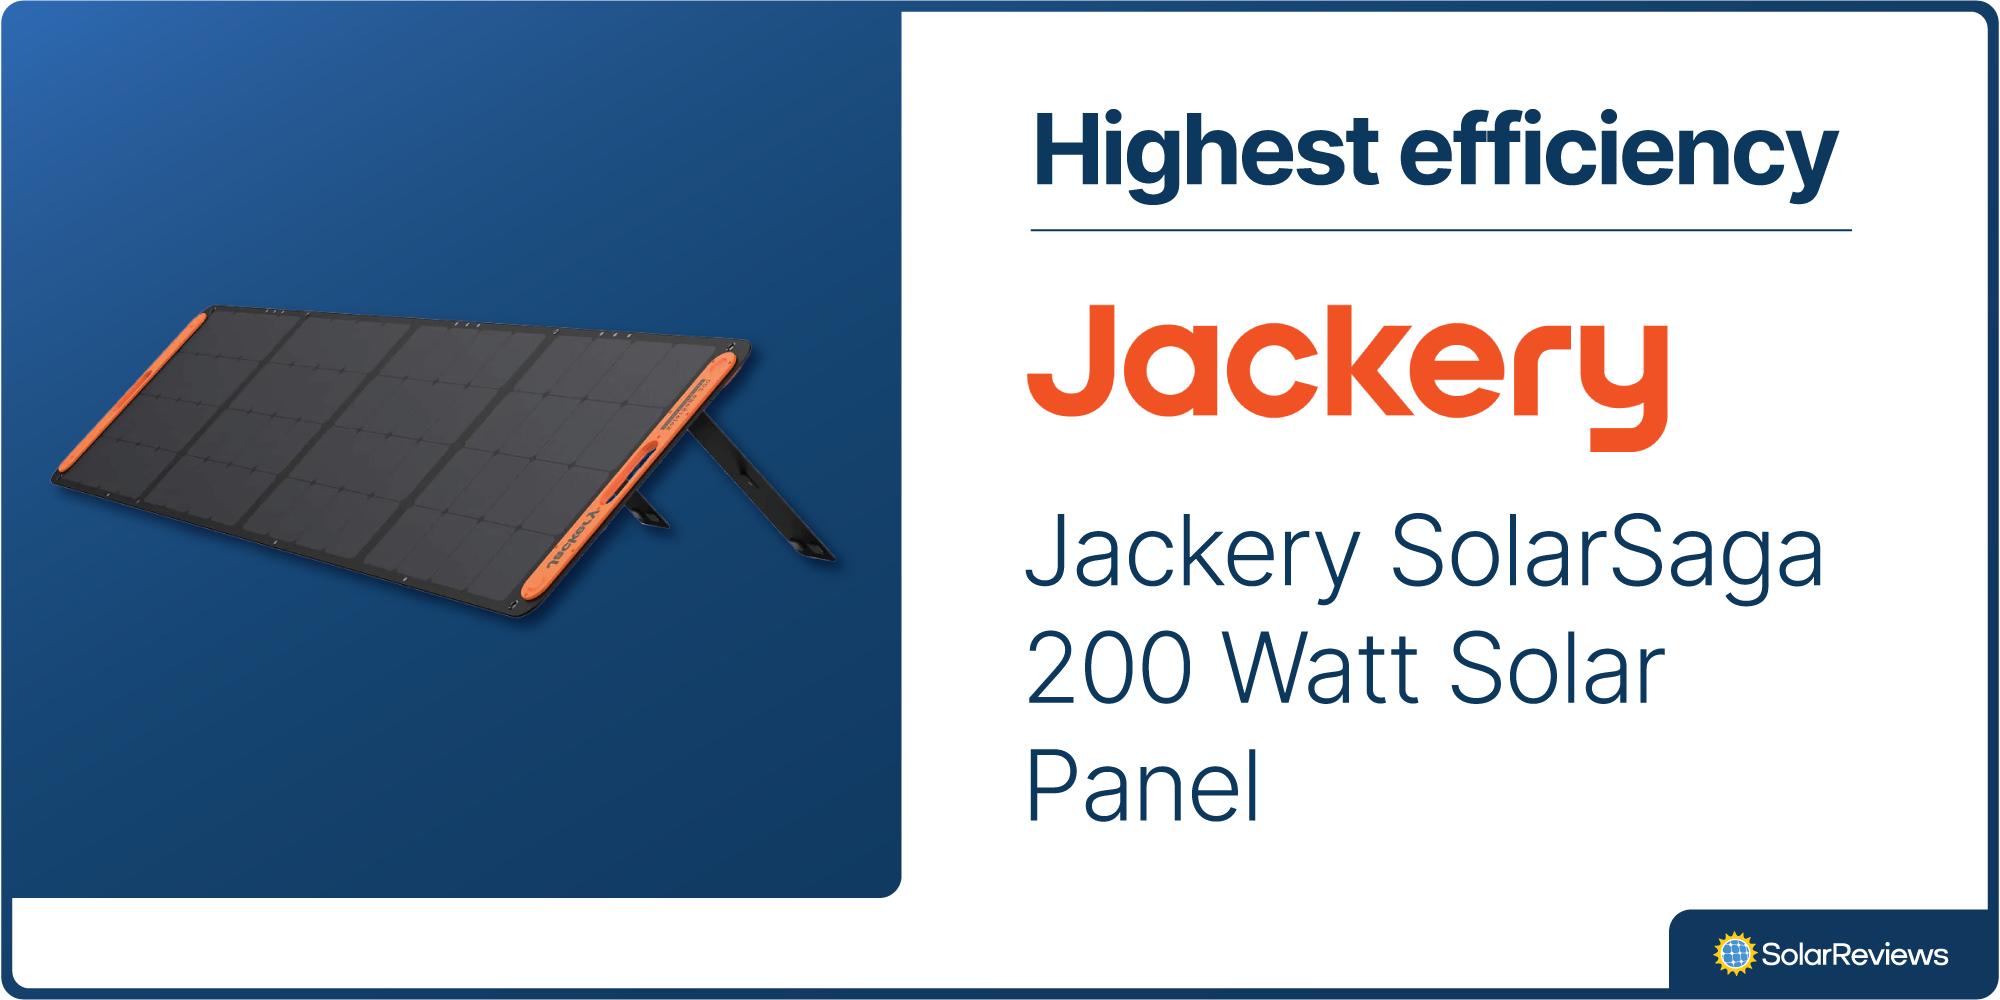 SolarReviews voted the Jackery SolarSaga 200 Watt Solar Panel as the most efficient solar panel for RV use.